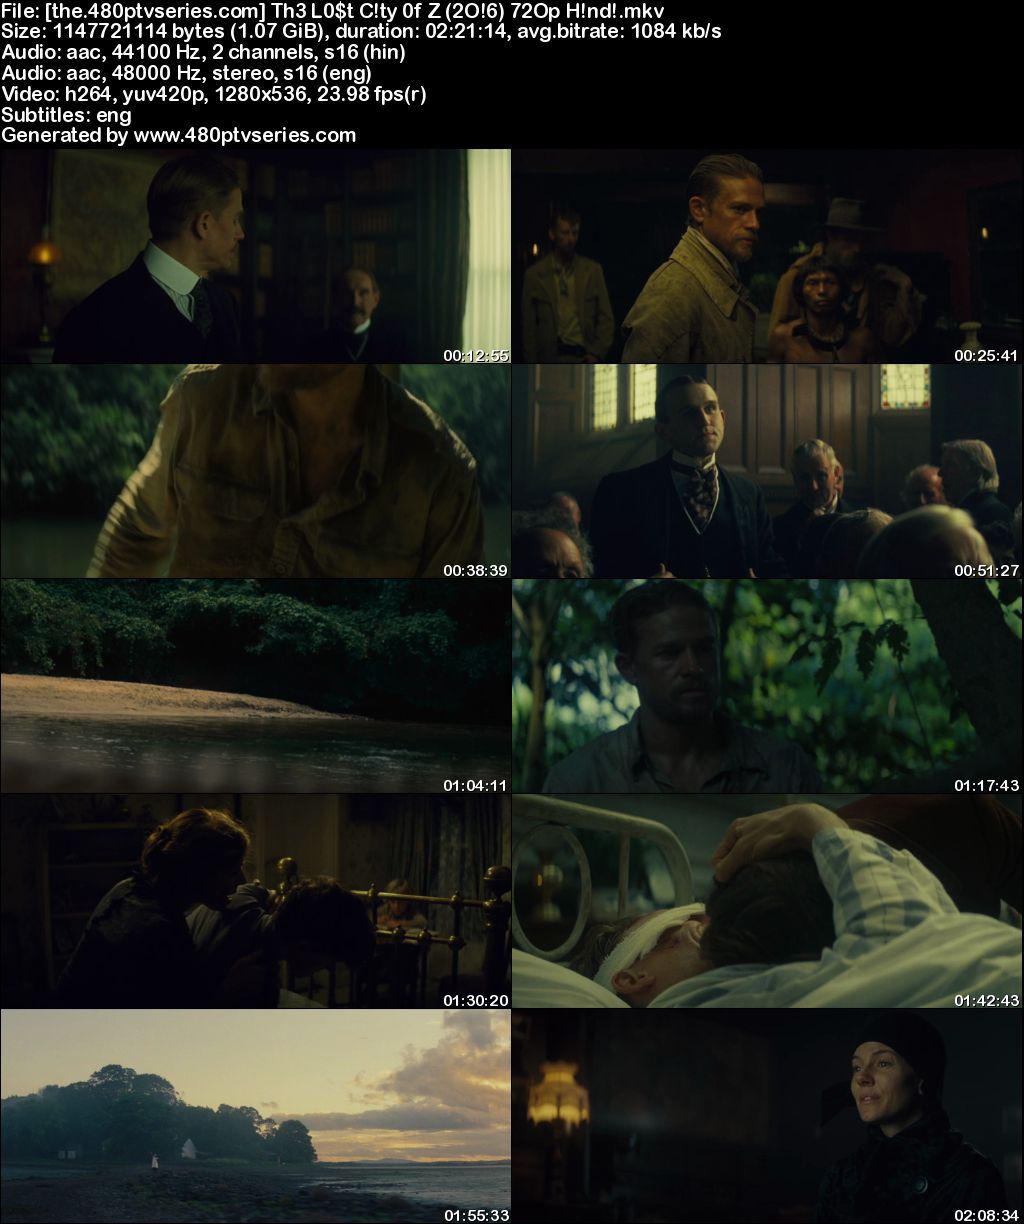 Watch Online Free The Lost City of Z (2016) Full Hindi Dual Audio Movie Download 480p 720p Bluray